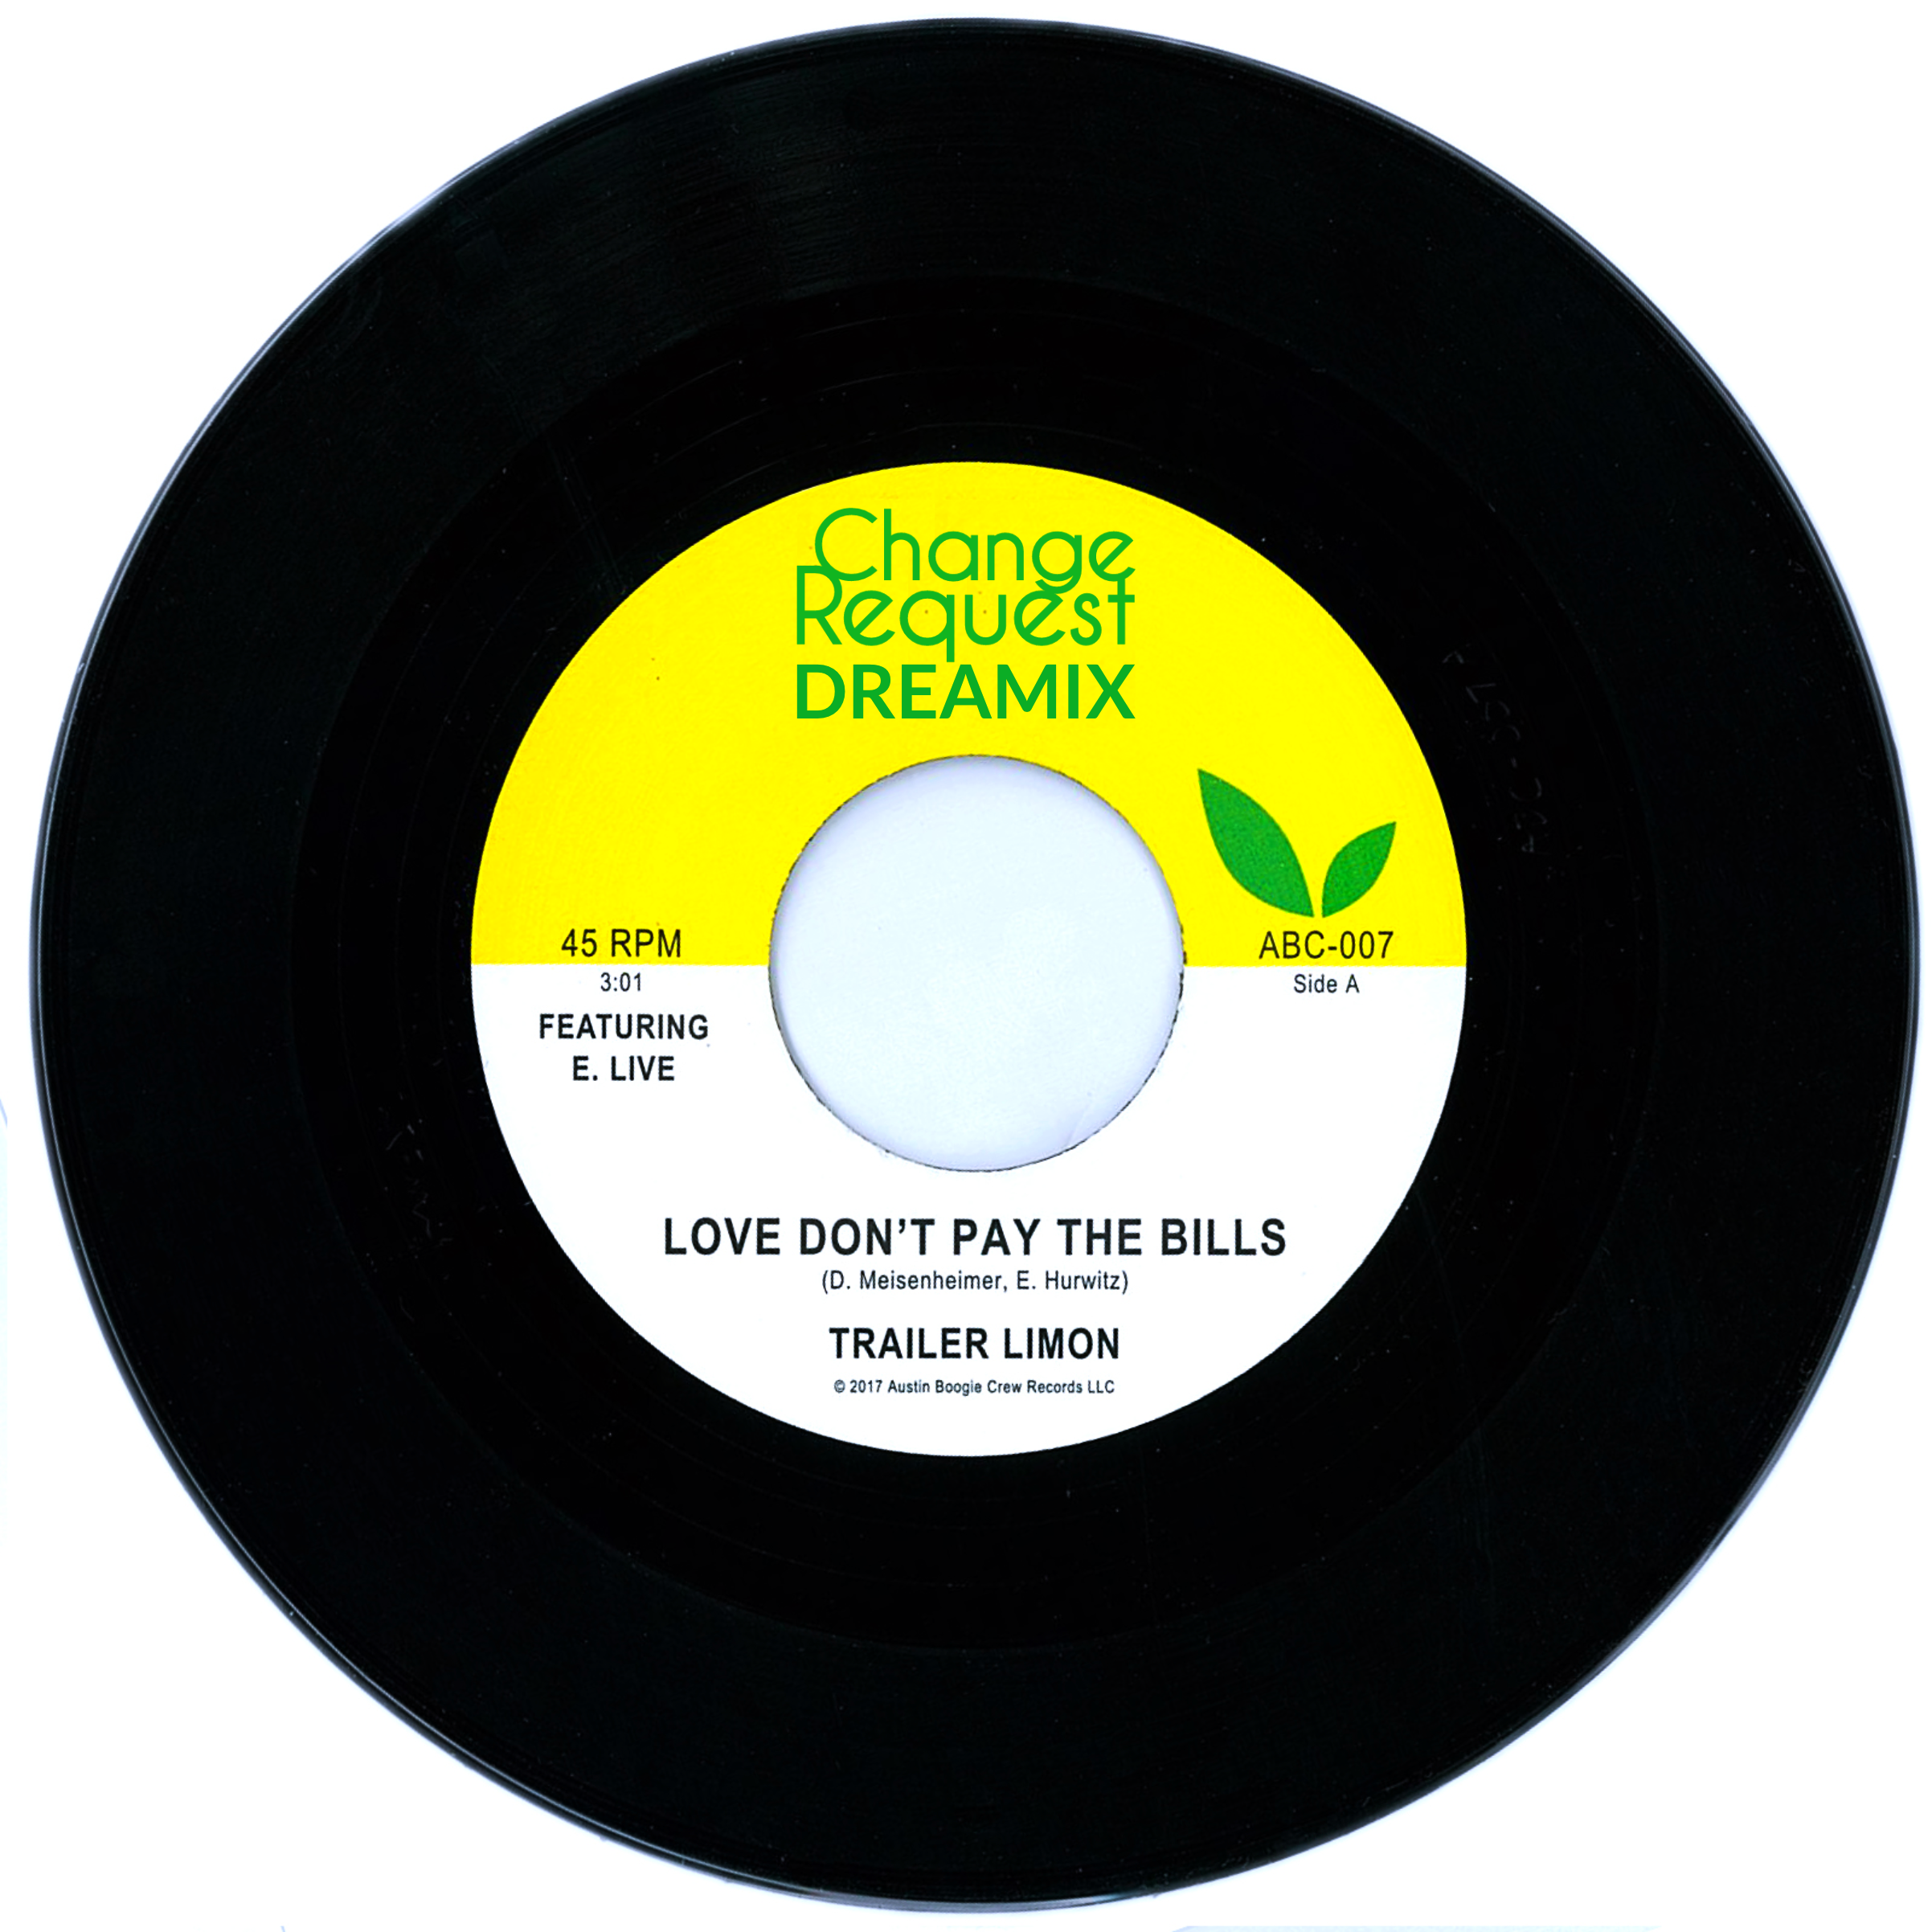 Love Don’t Pay The Bills (Change Request Dreamix)